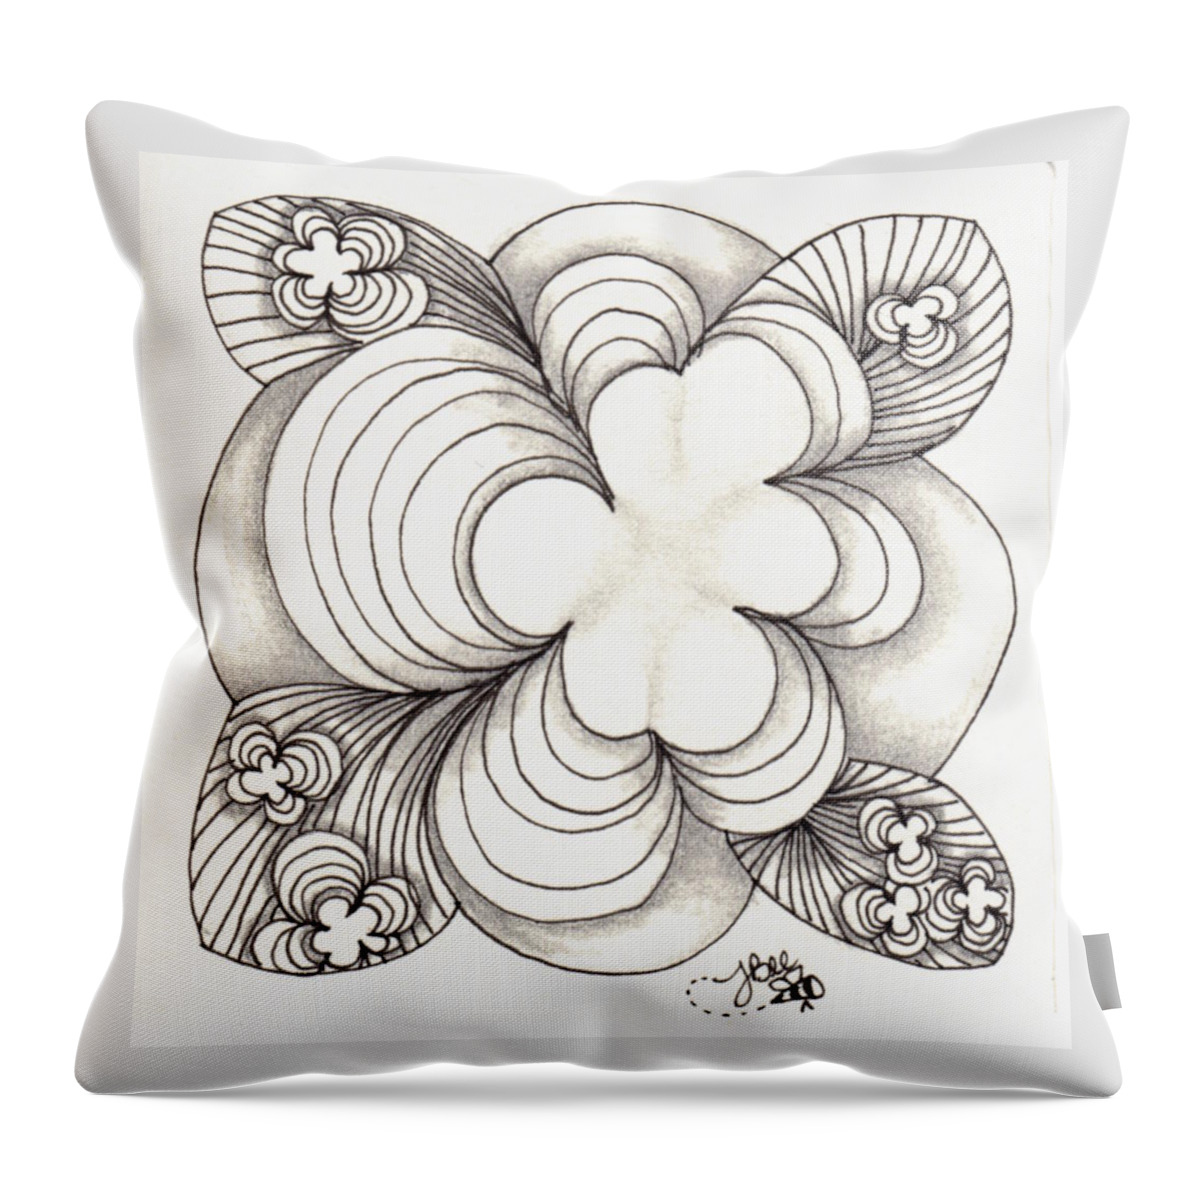 Zentangle Throw Pillow featuring the drawing Popcloud Blossom by Jan Steinle